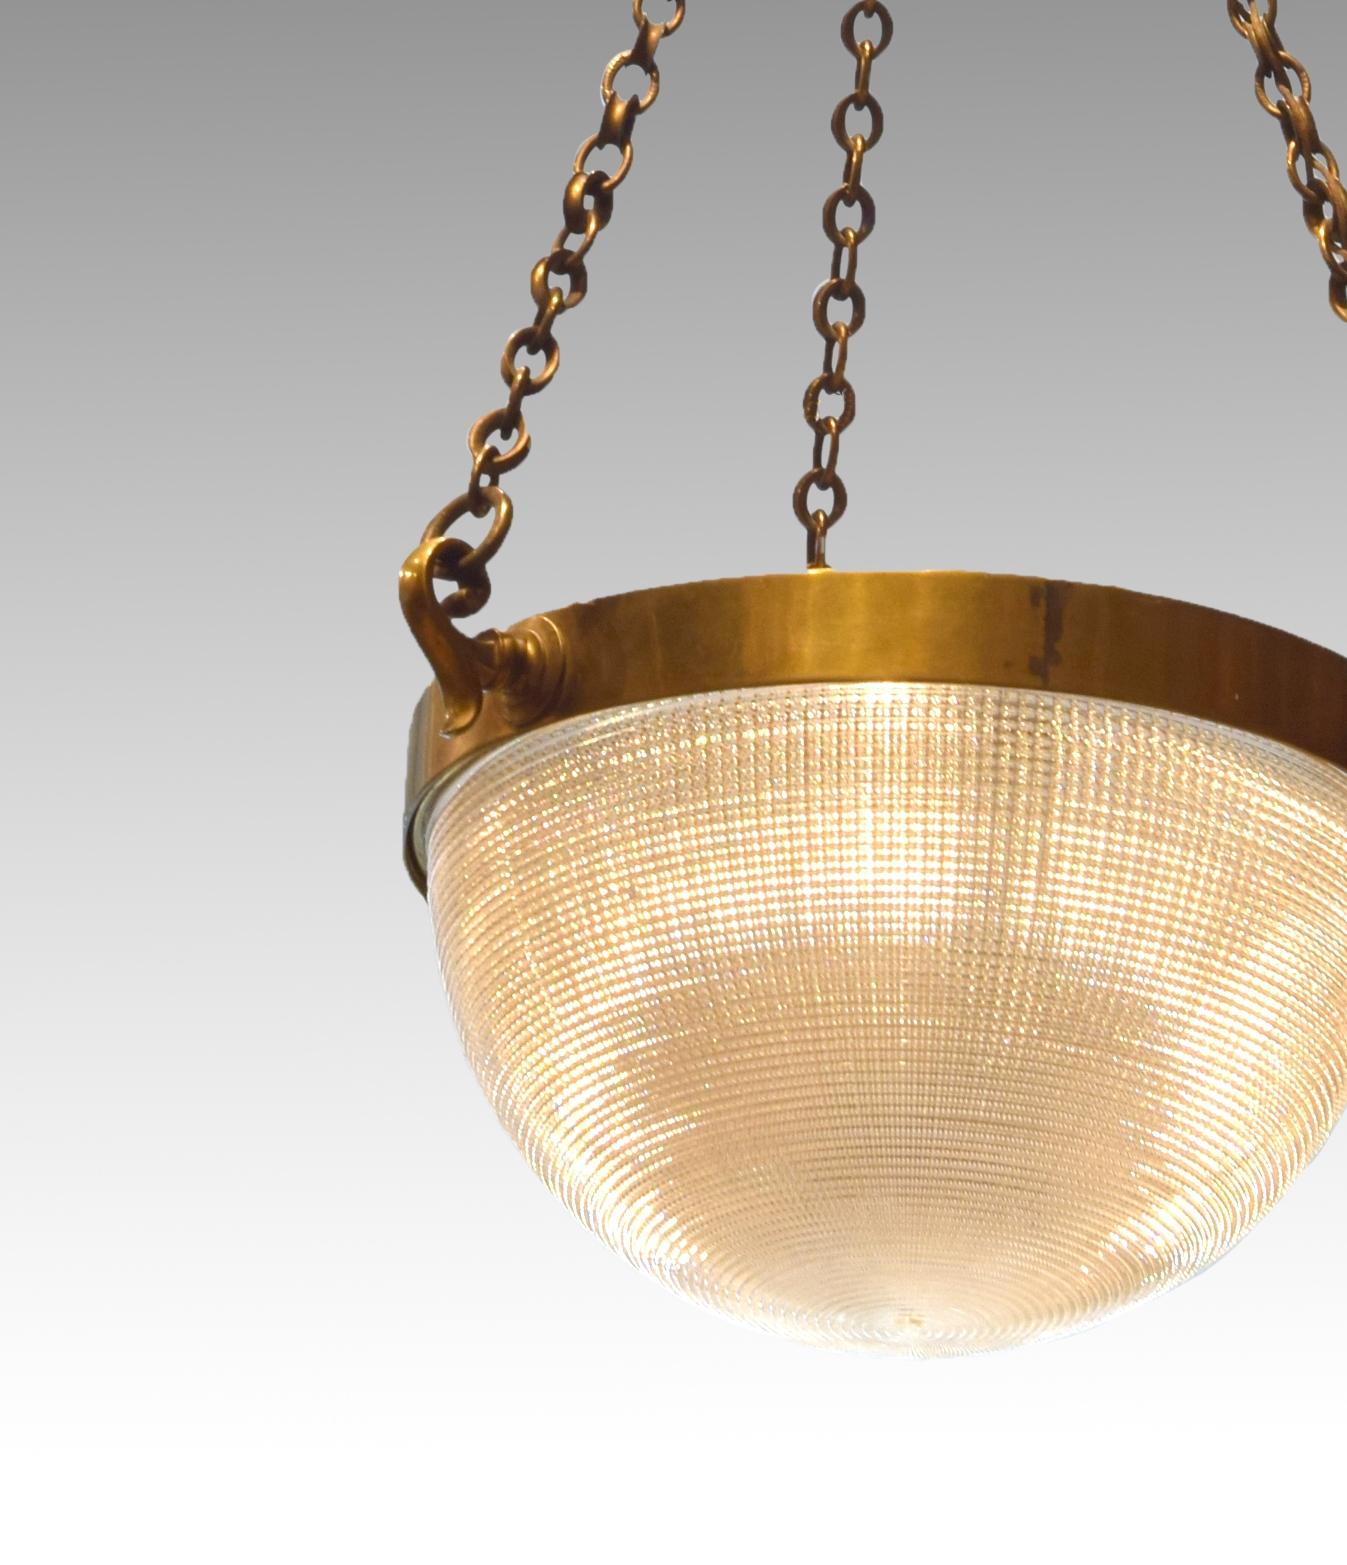 Ceiling lamp. Metal, glass, 20th century.
Ceiling lamp made up of a circular piece for the ceiling from which a chain hangs to a piece made up of a ring and a sphere, from which three other chains that support the lamp, consisting of another smooth